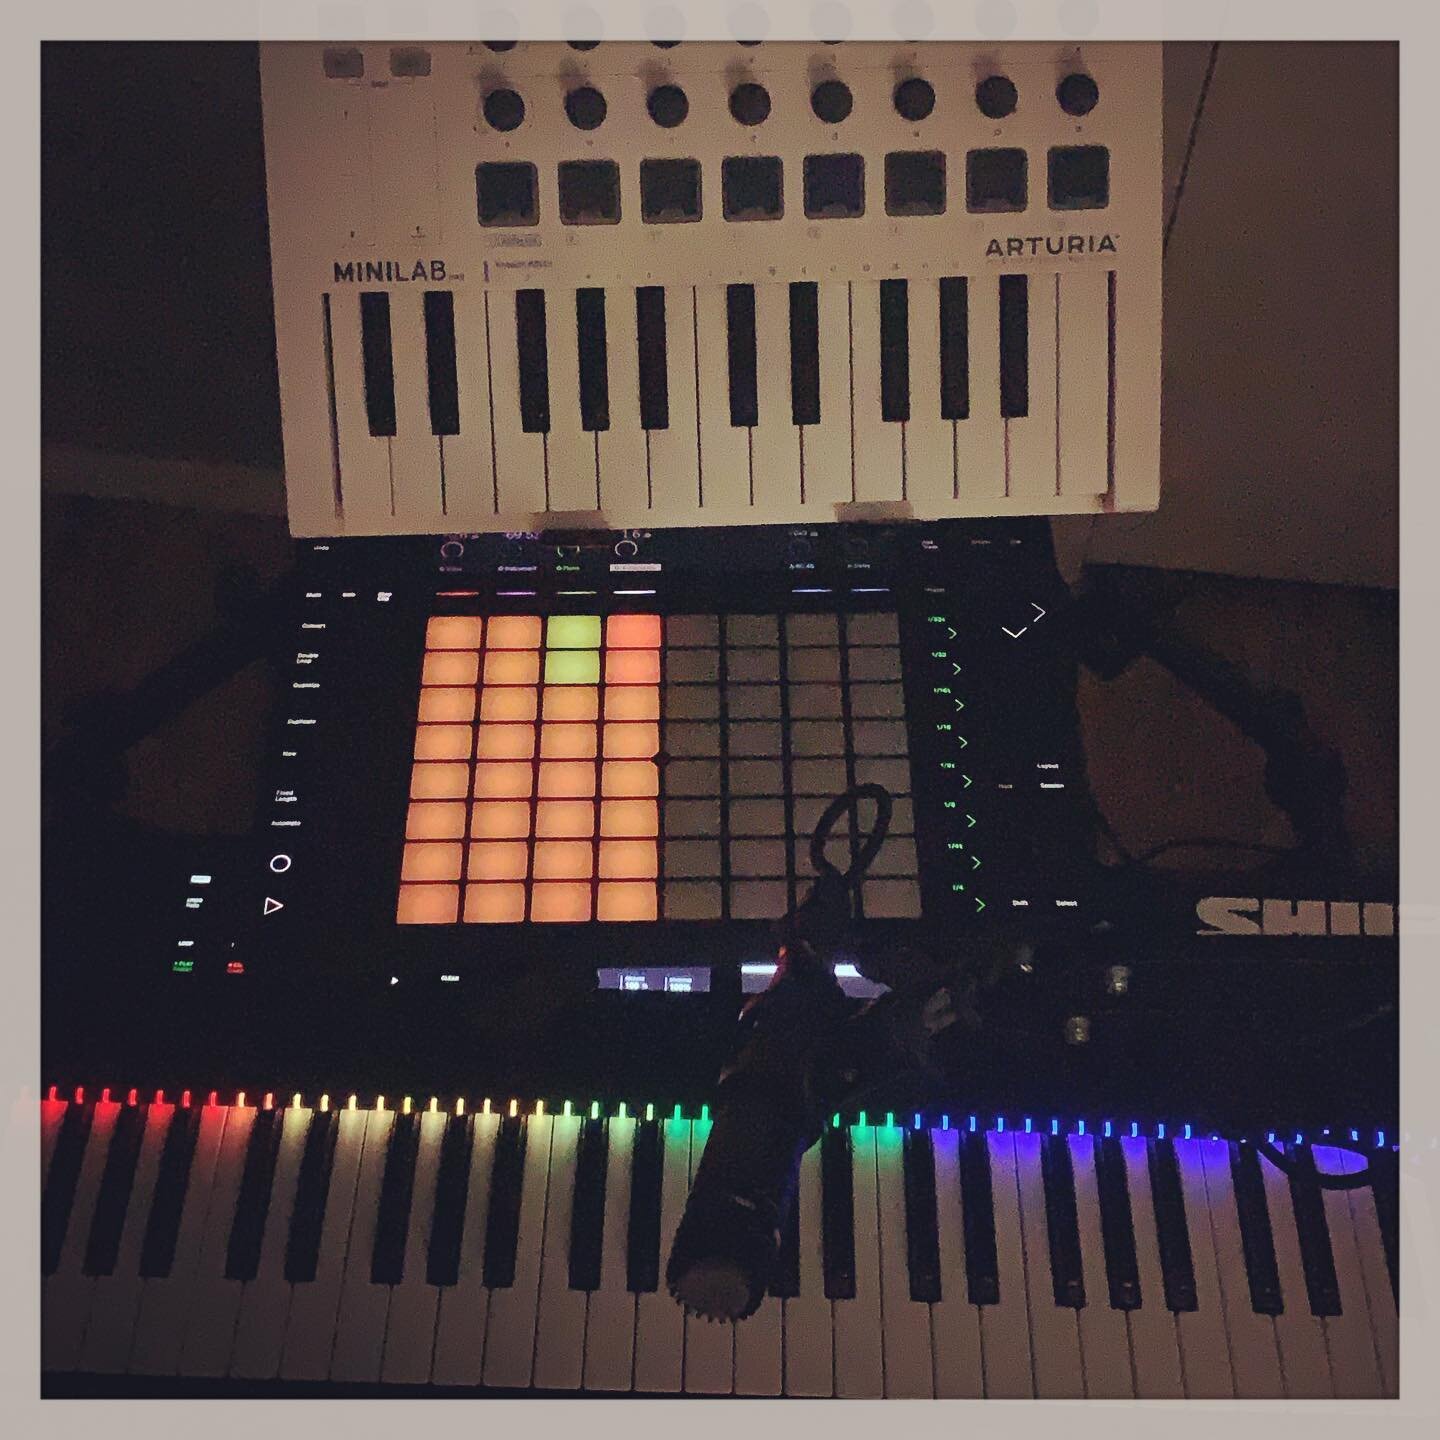 🤩 Behold my #pianosandwich 🎹🥪 #currentsetup for #livestream and #musicproduction using #minilab #push2 #kompletekontrol #Mk2 #shuresm57 #scarlett8i6 #piano #musicproducer #ableton #focusrite #live #musicislife #colors #beautiful